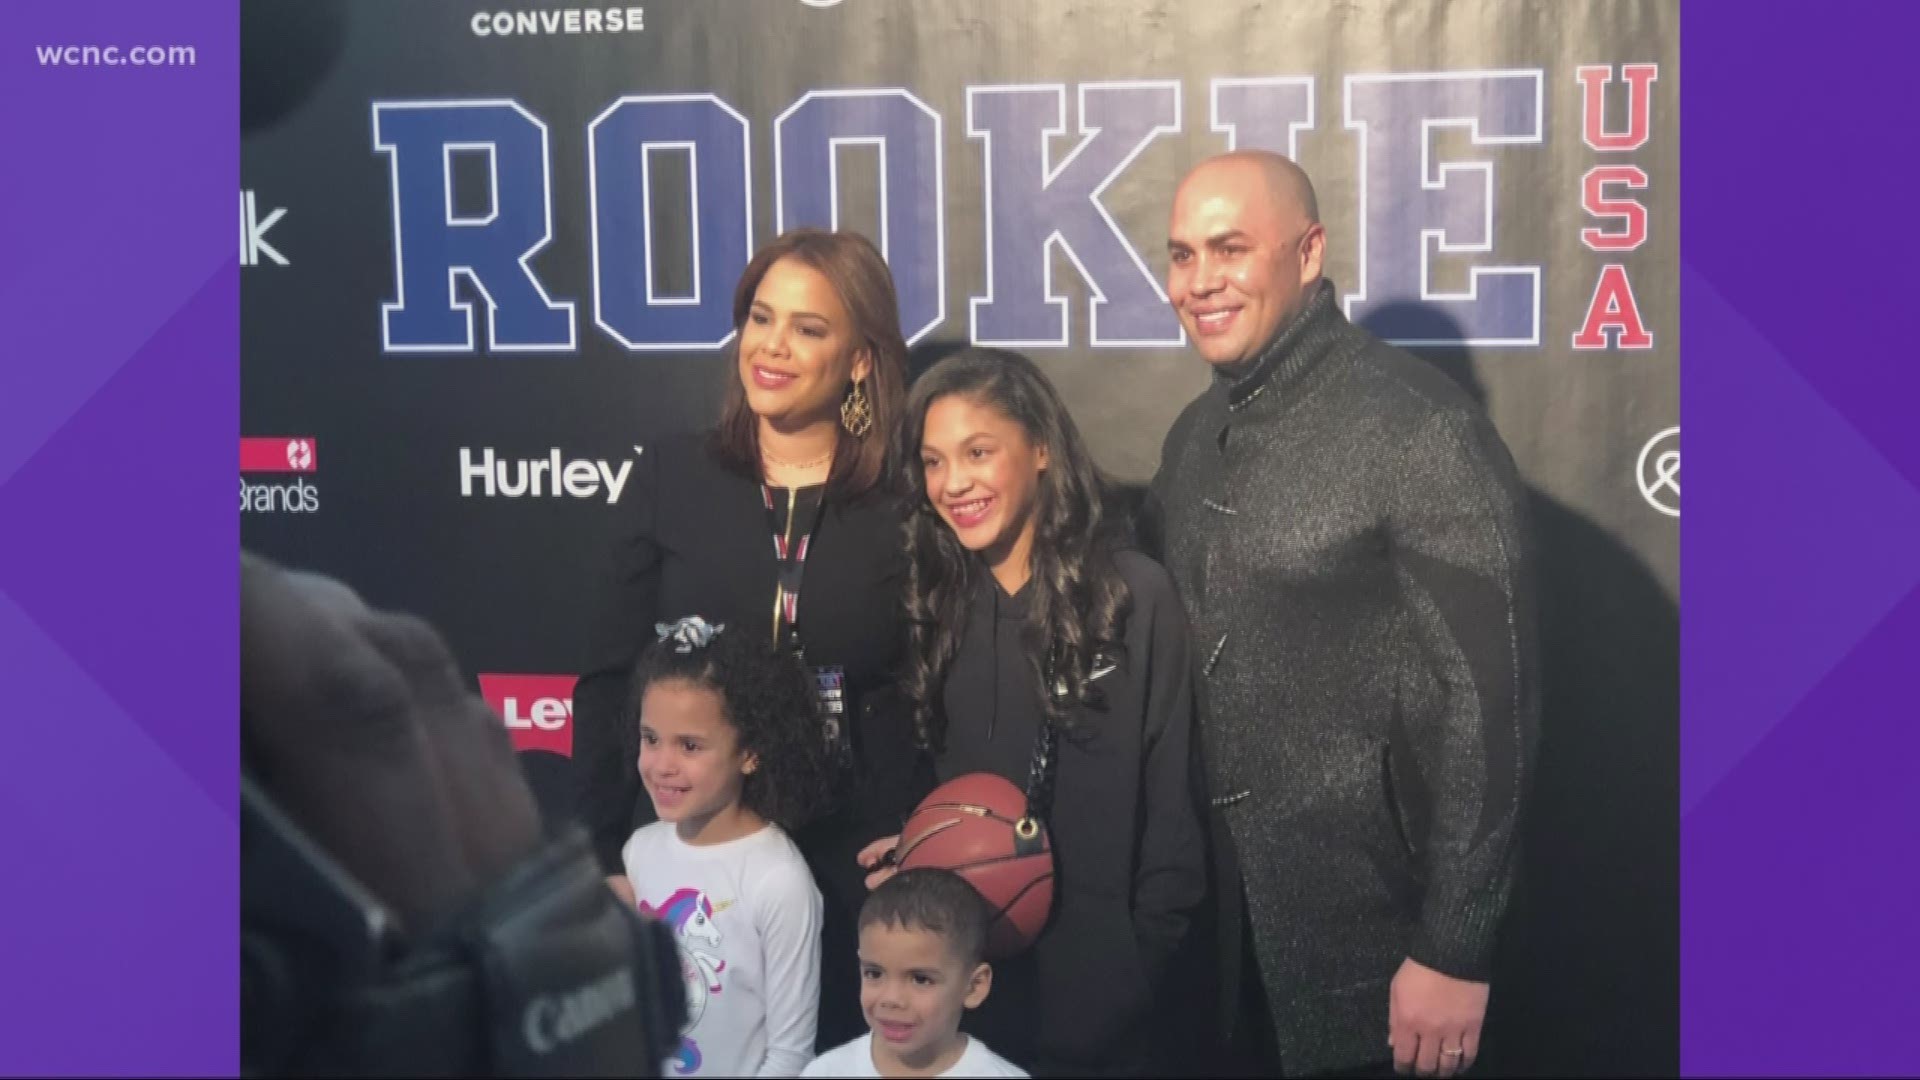 The children of celebrities are taking the center stage for the Rookie Fashion Show, kicking off All-Star Weekend for many.